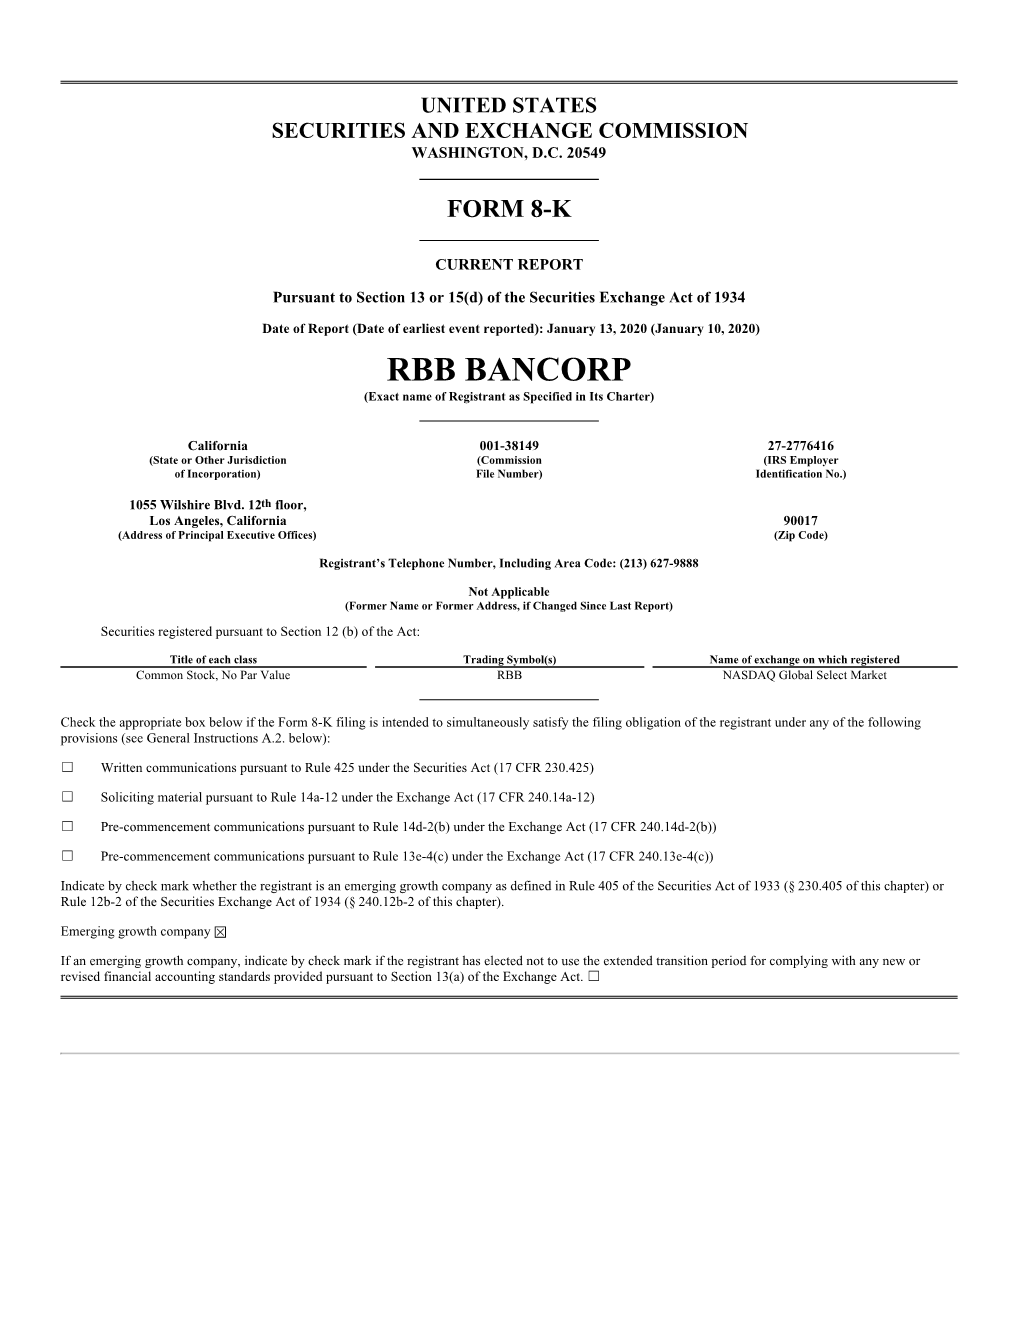 Investor Relations | RBB Bancorp